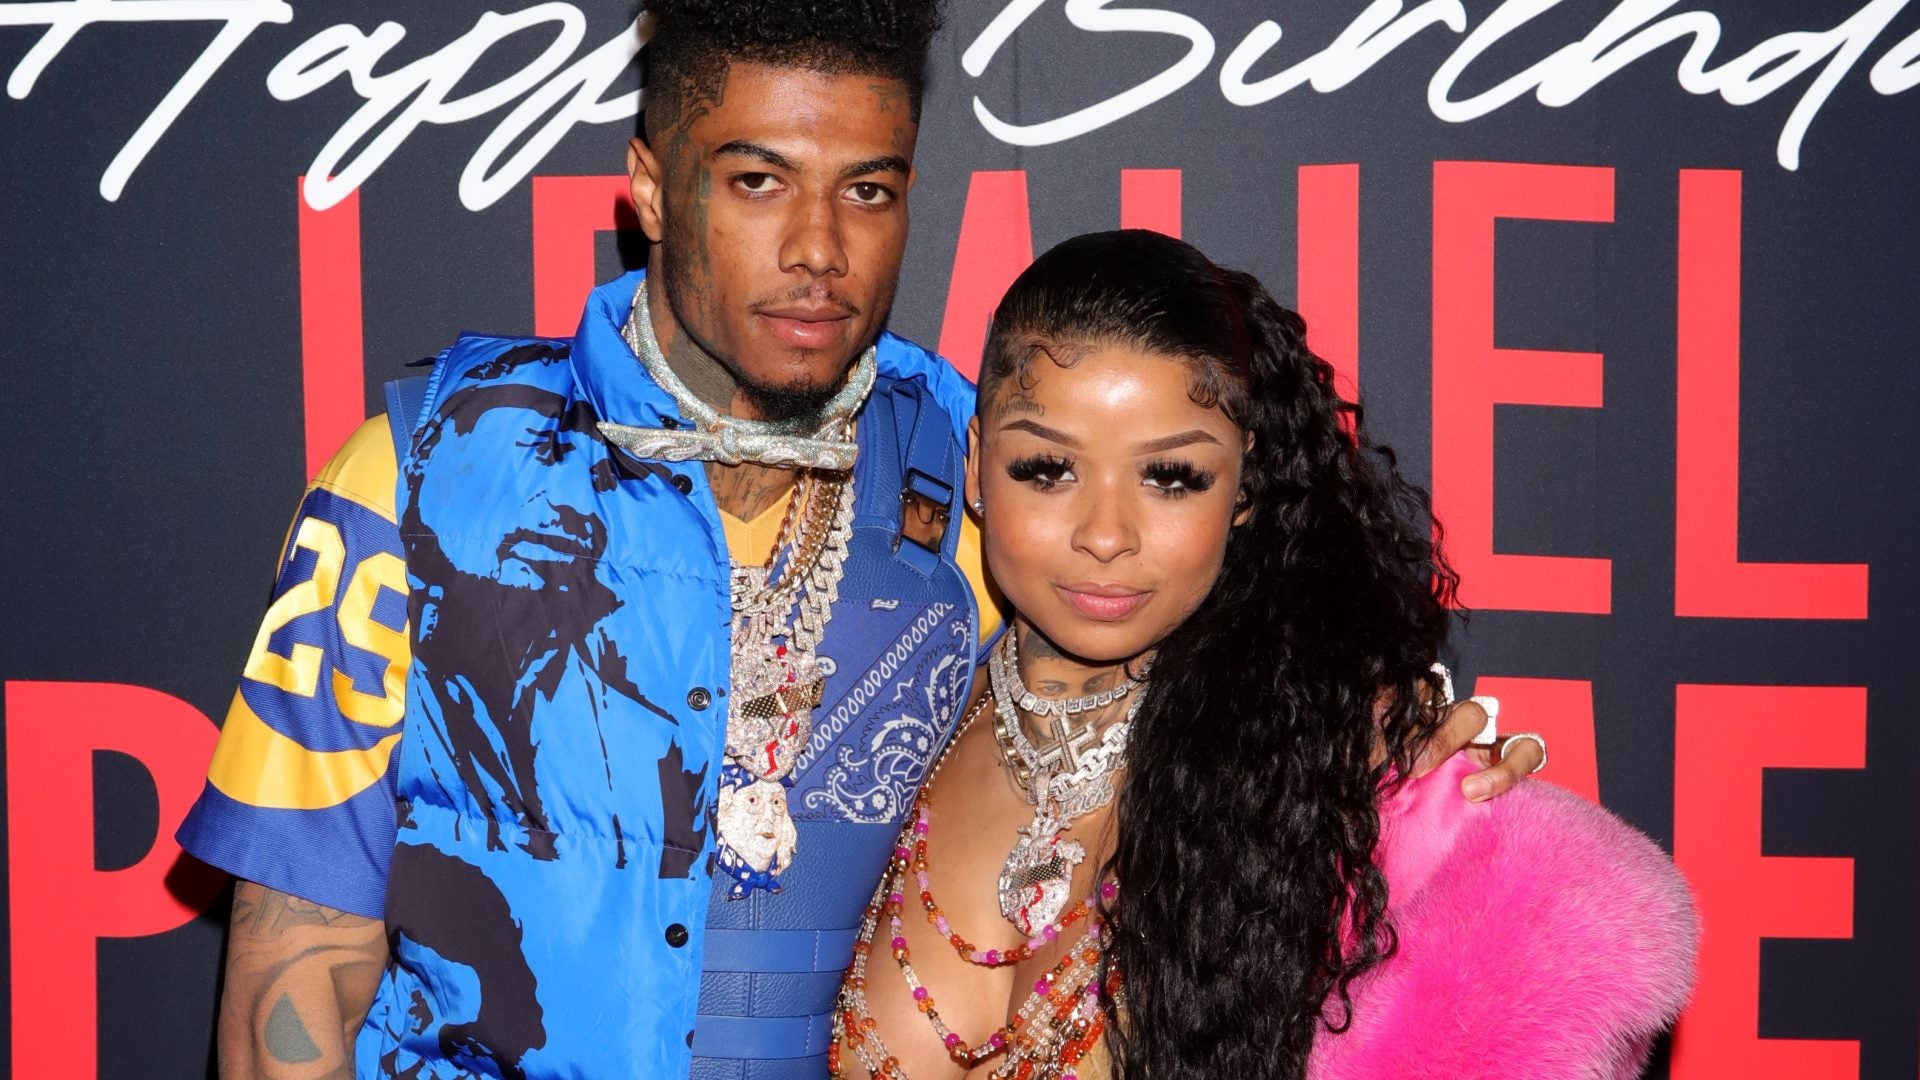 Op-Ed: I Don't Care For Blueface And Chrisean — But I Do Care About The Well-Being Of Their Child